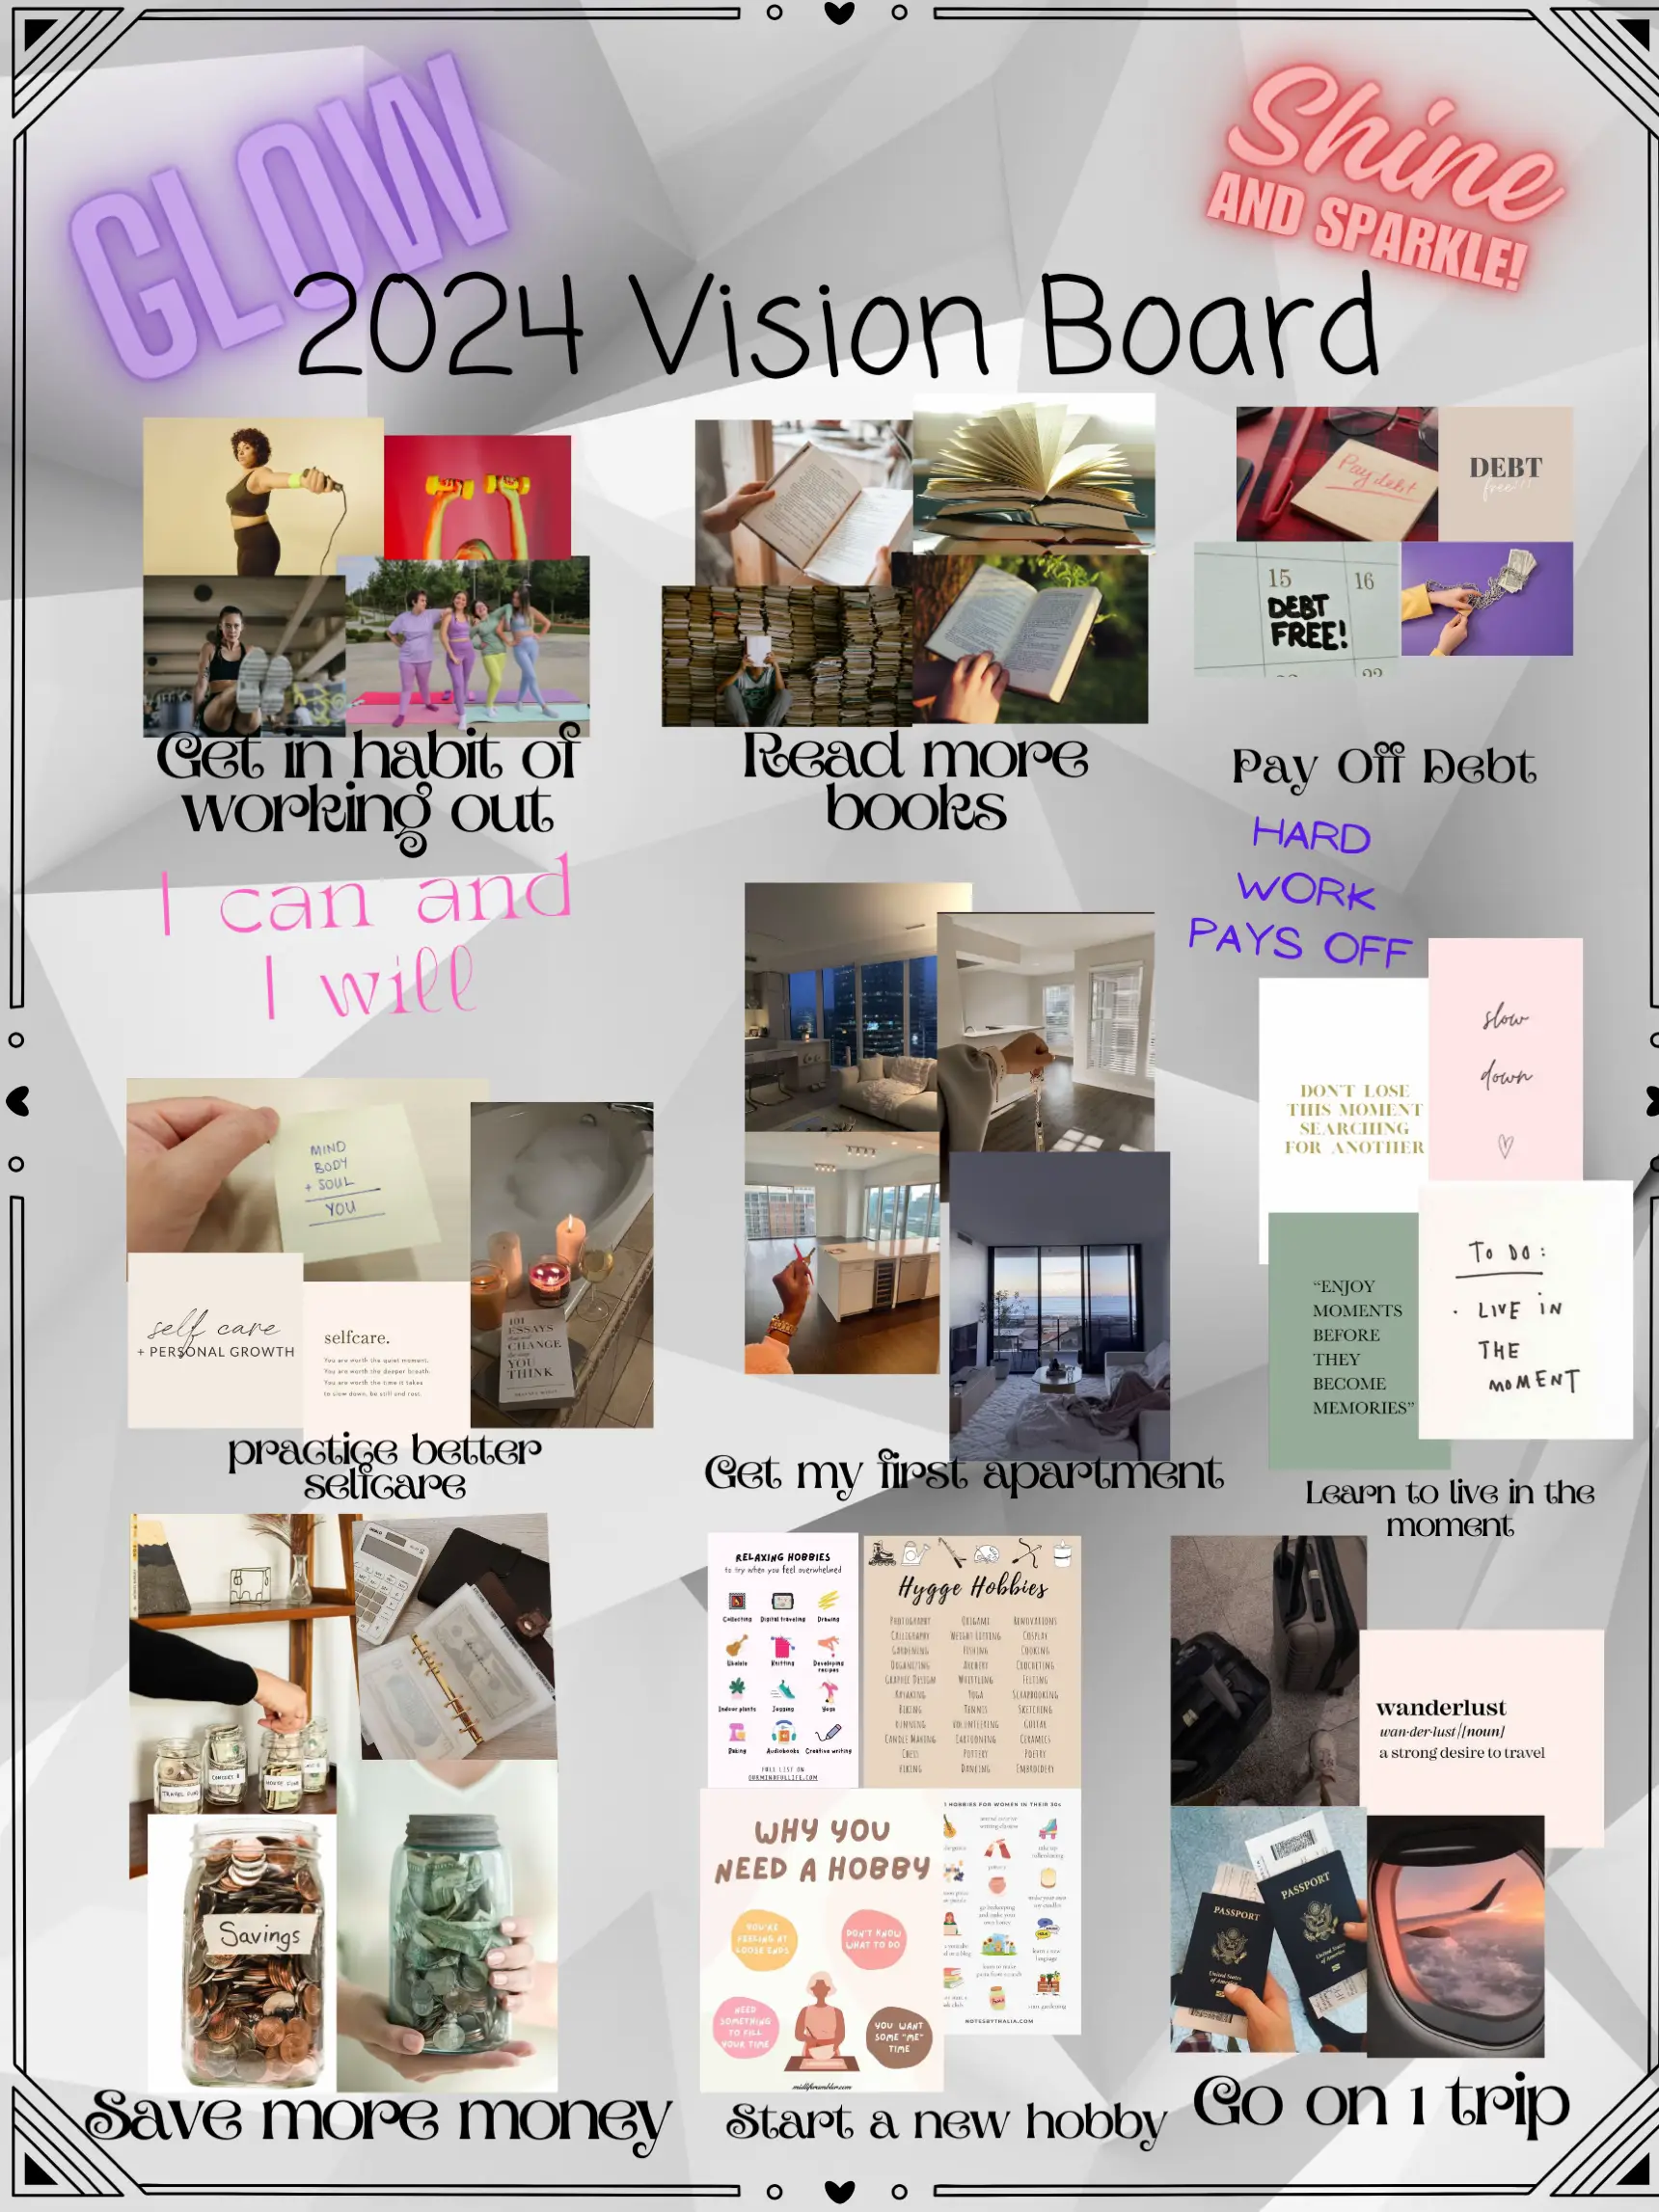 My Vision Board for 2024, Gallery posted by Mar-Mar88